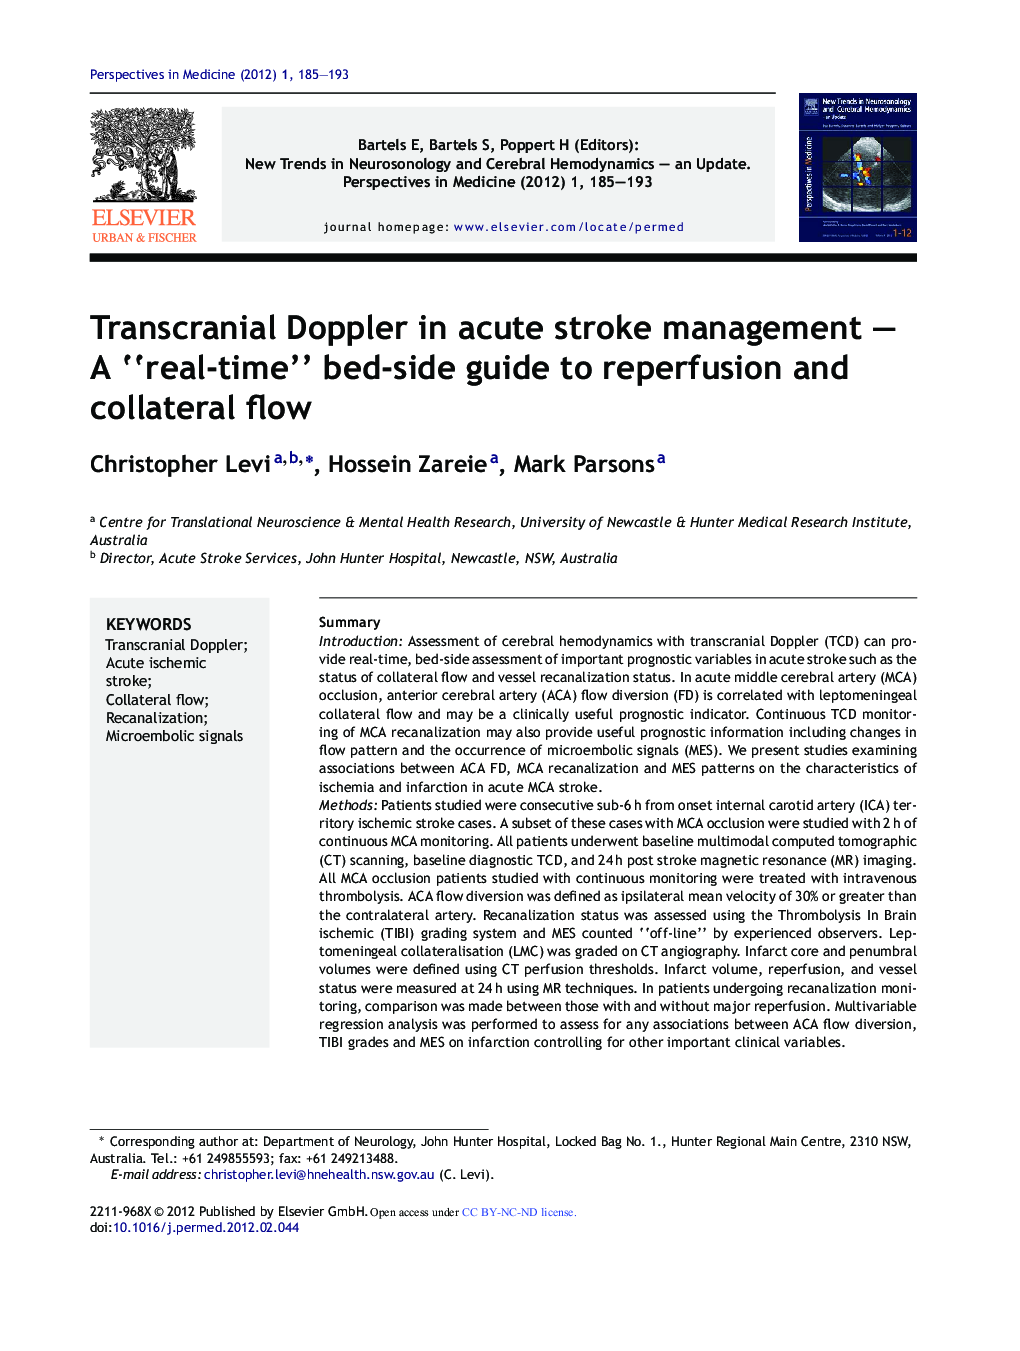 Transcranial Doppler in acute stroke management – A “real-time” bed-side guide to reperfusion and collateral flow